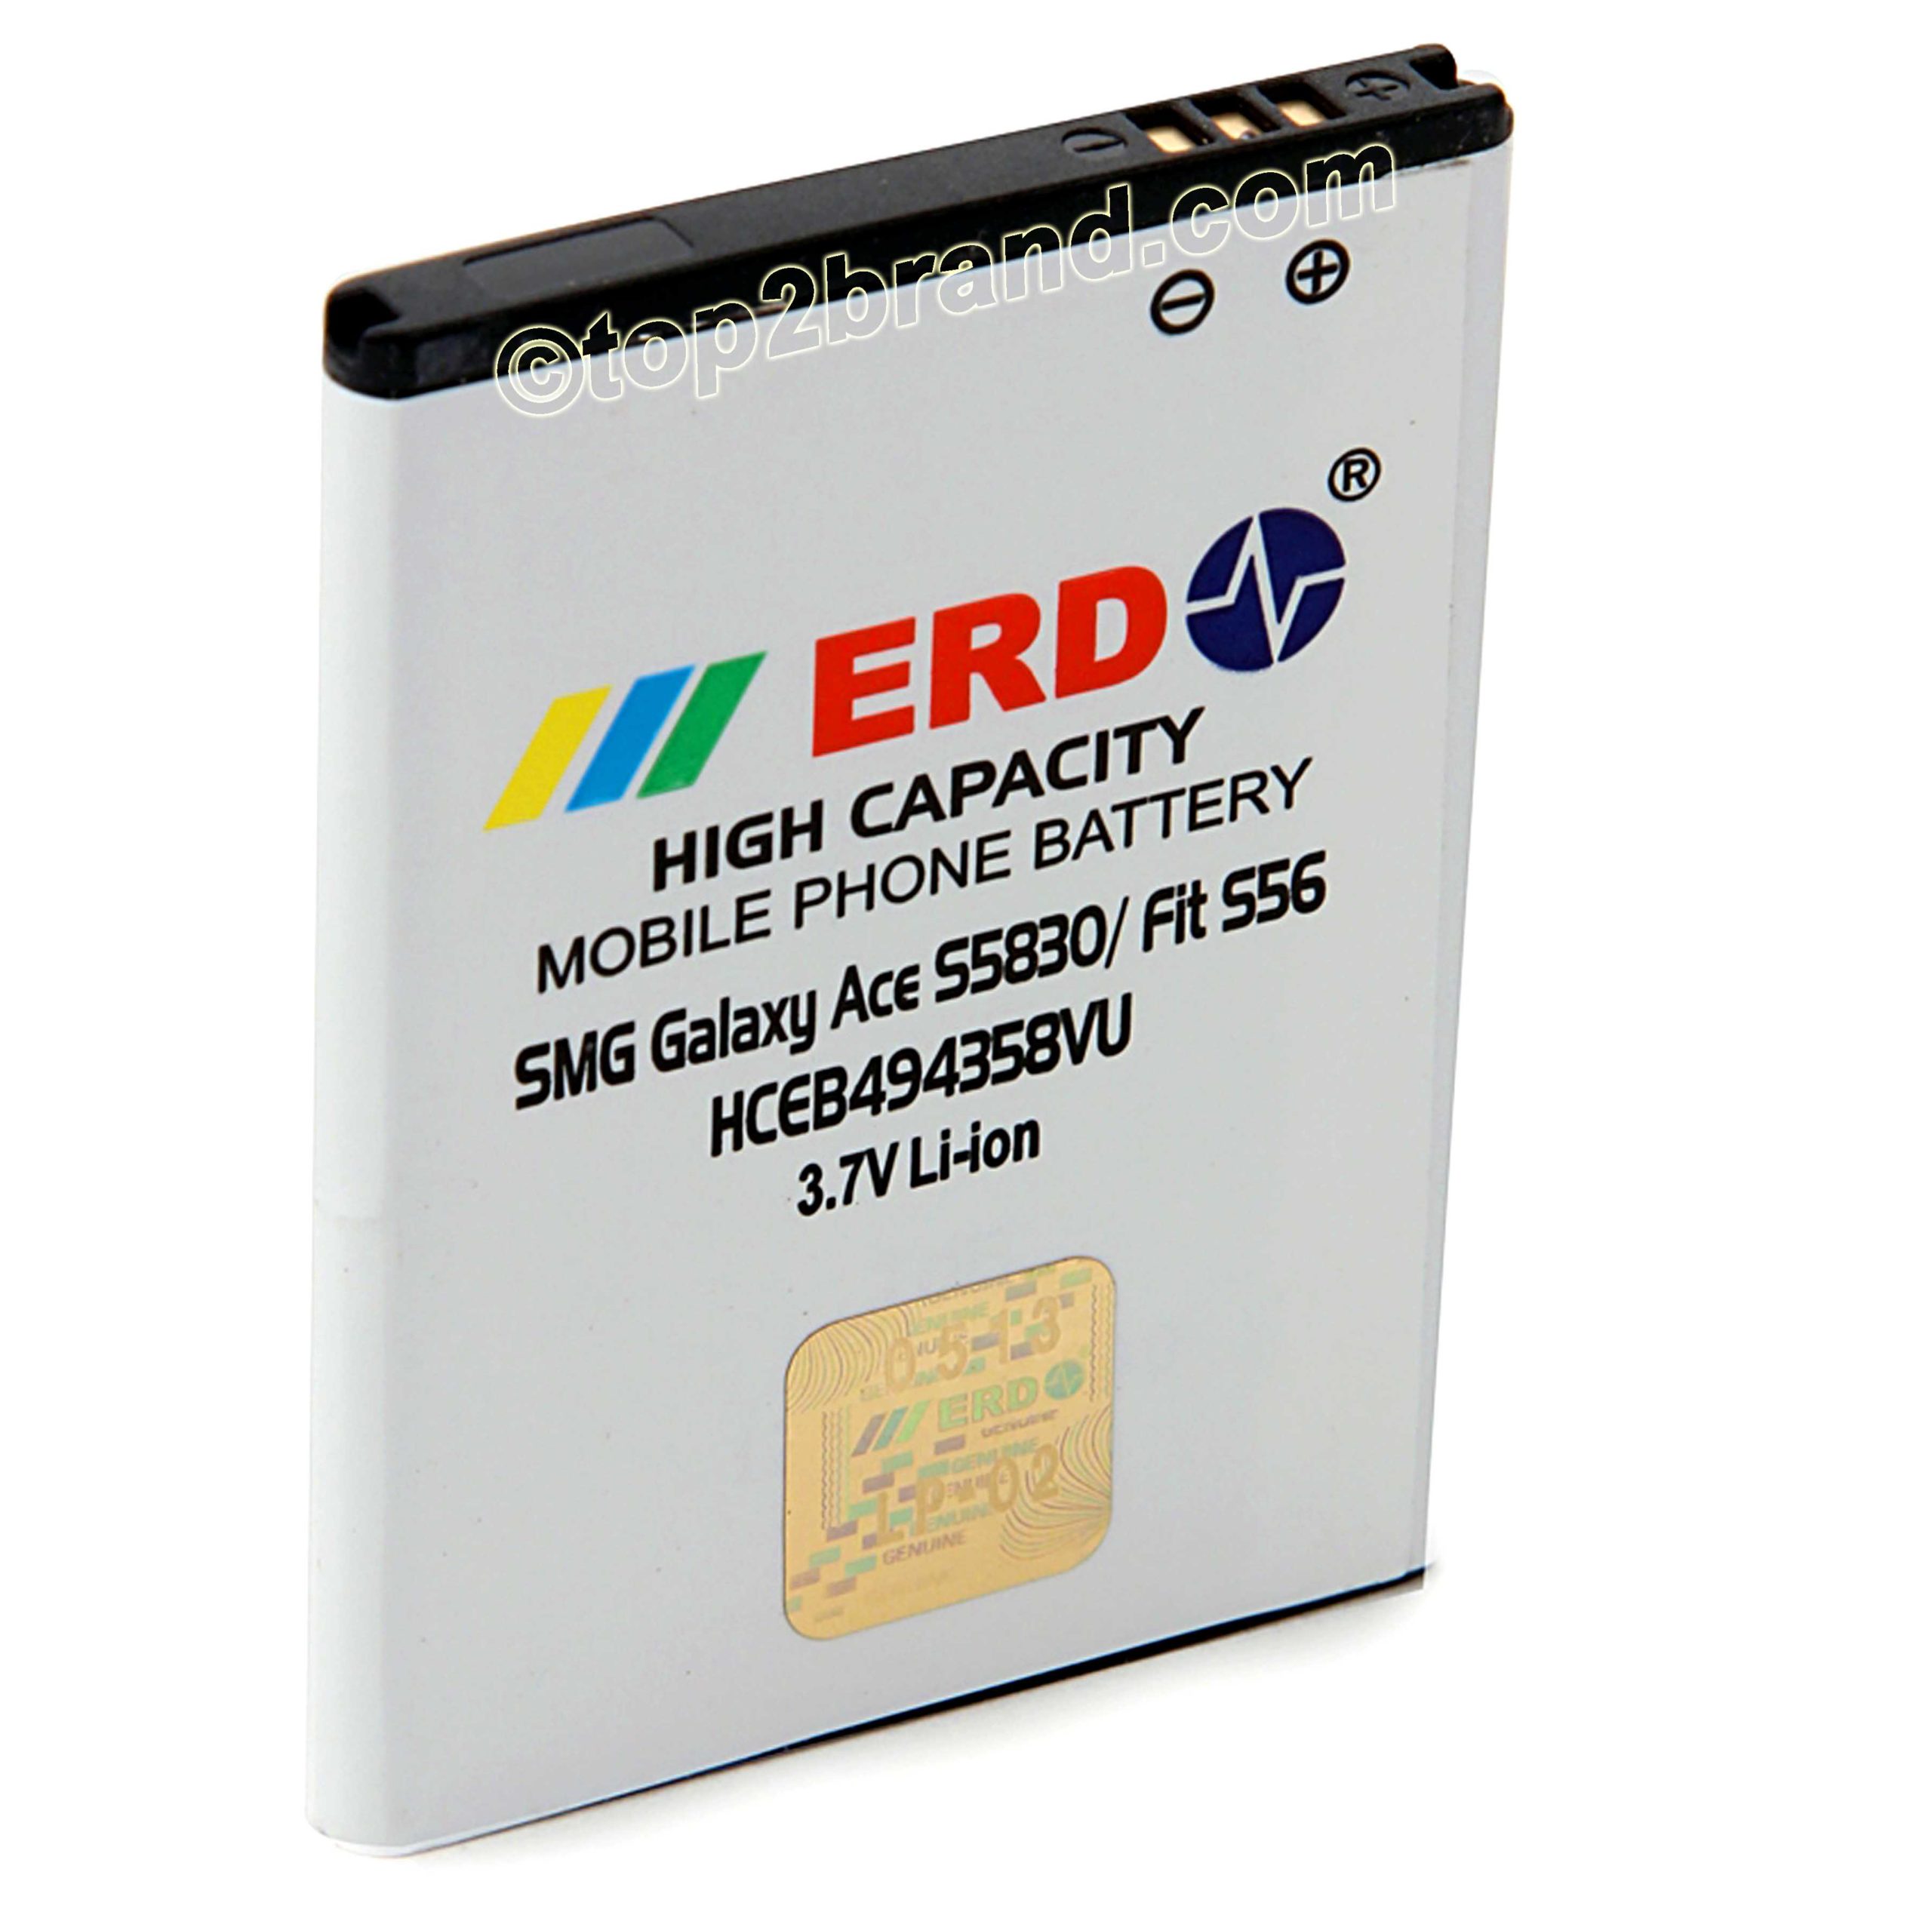 Samsung Galaxy Young GT-S6312 battery by Erd { SUPER POWER BATTERY }